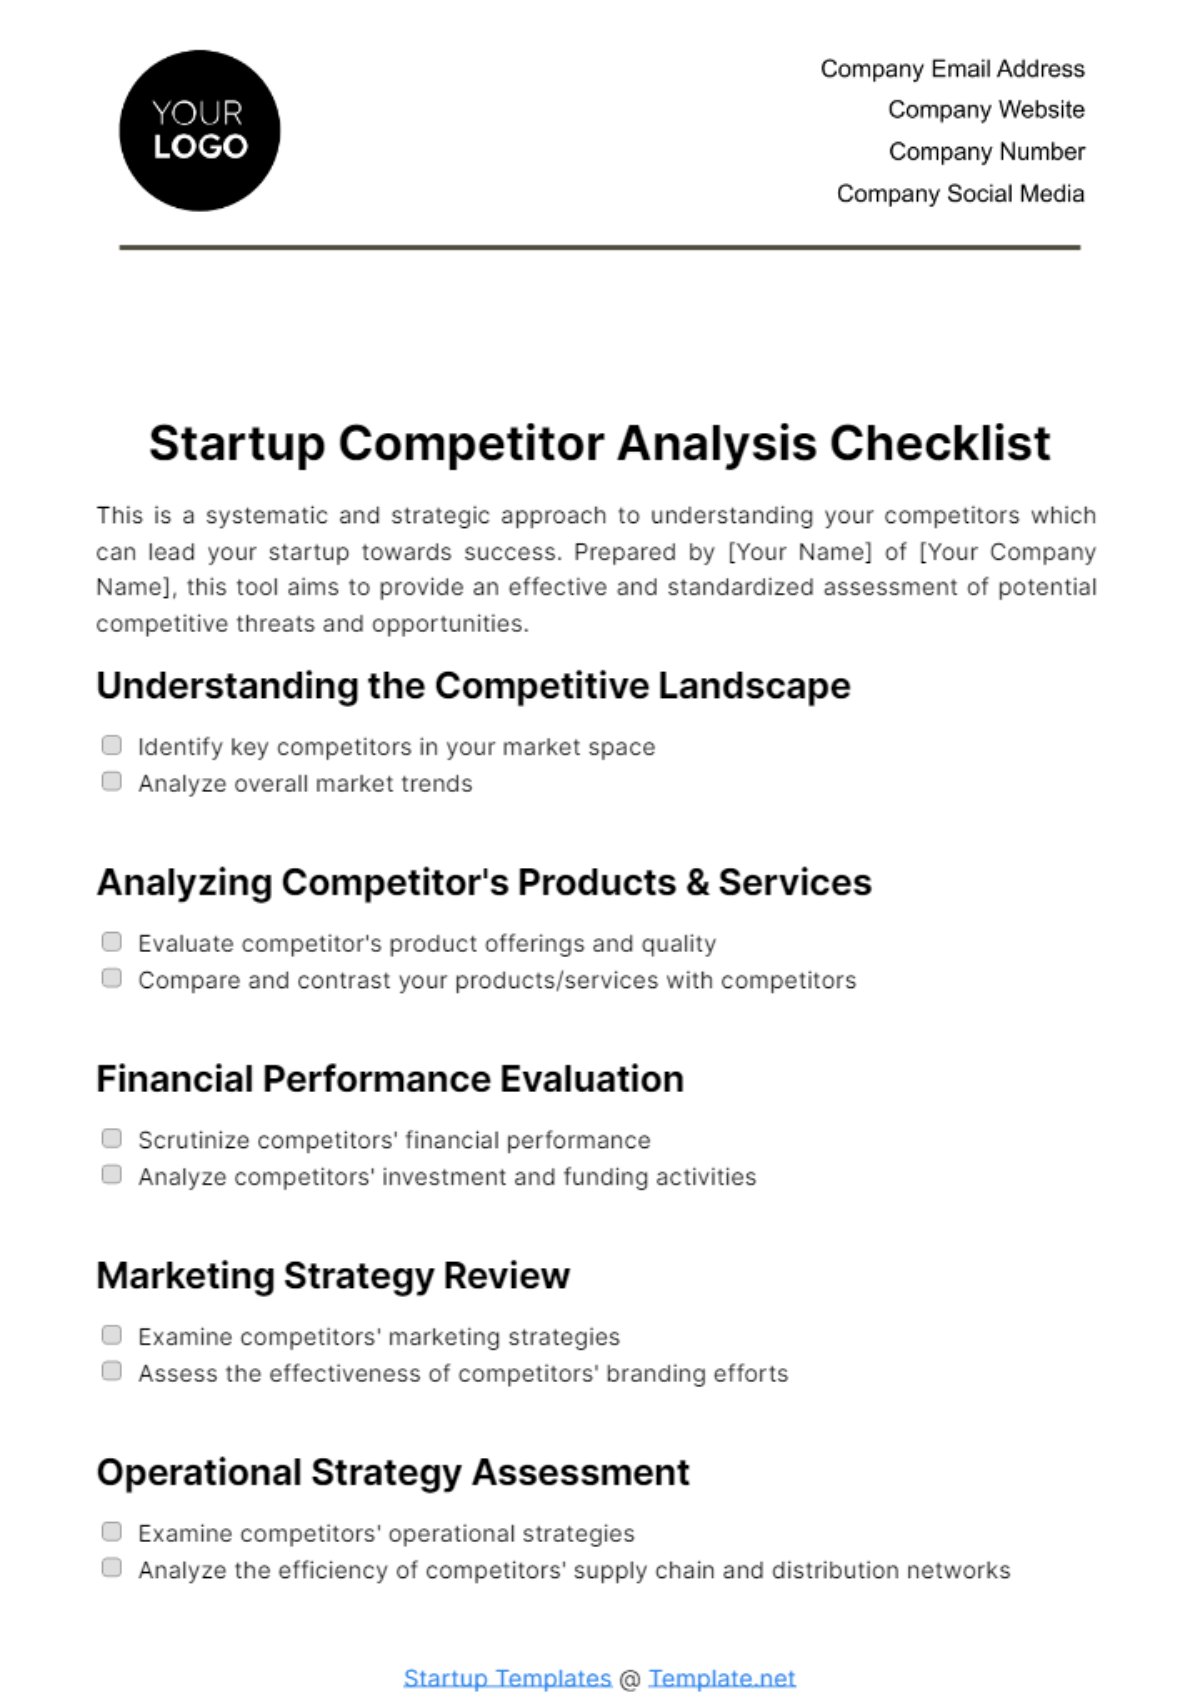 Free Startup Competitor Analysis Checklist Template